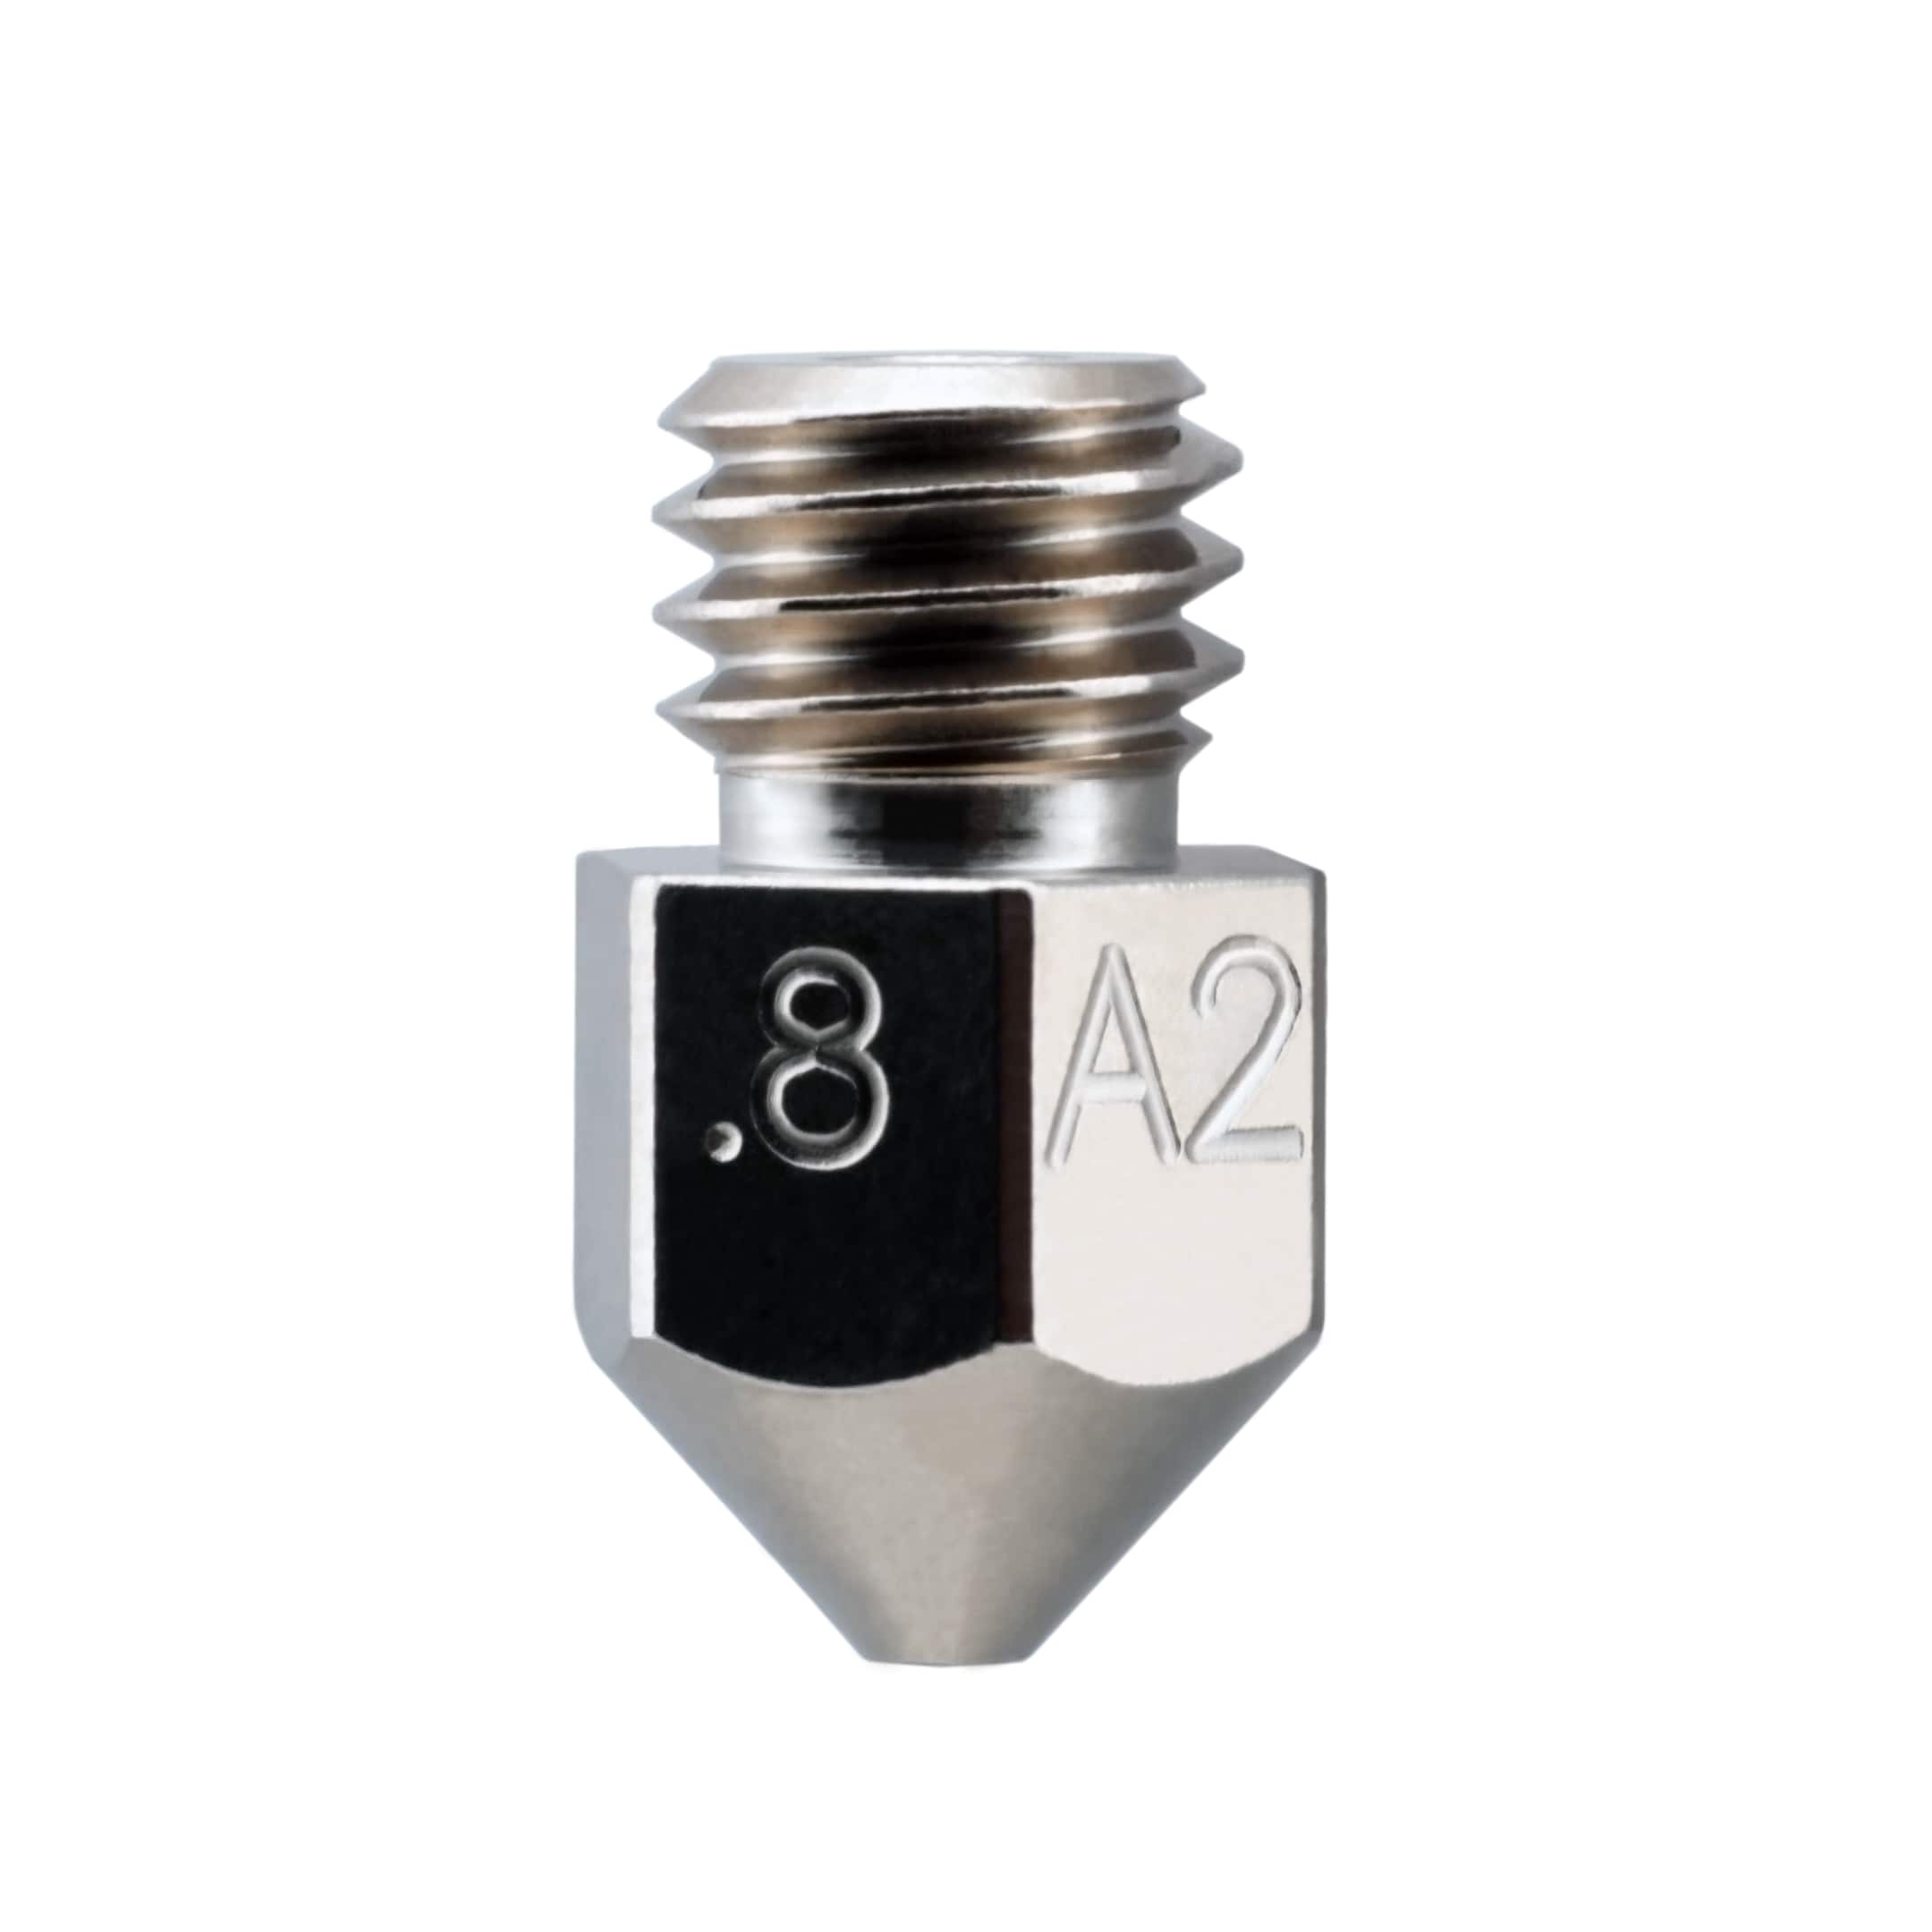 Micro Swiss A2 Hardened Steel Nozzle for MK8 (CR10 / Ender / Tornado / MakerBot)